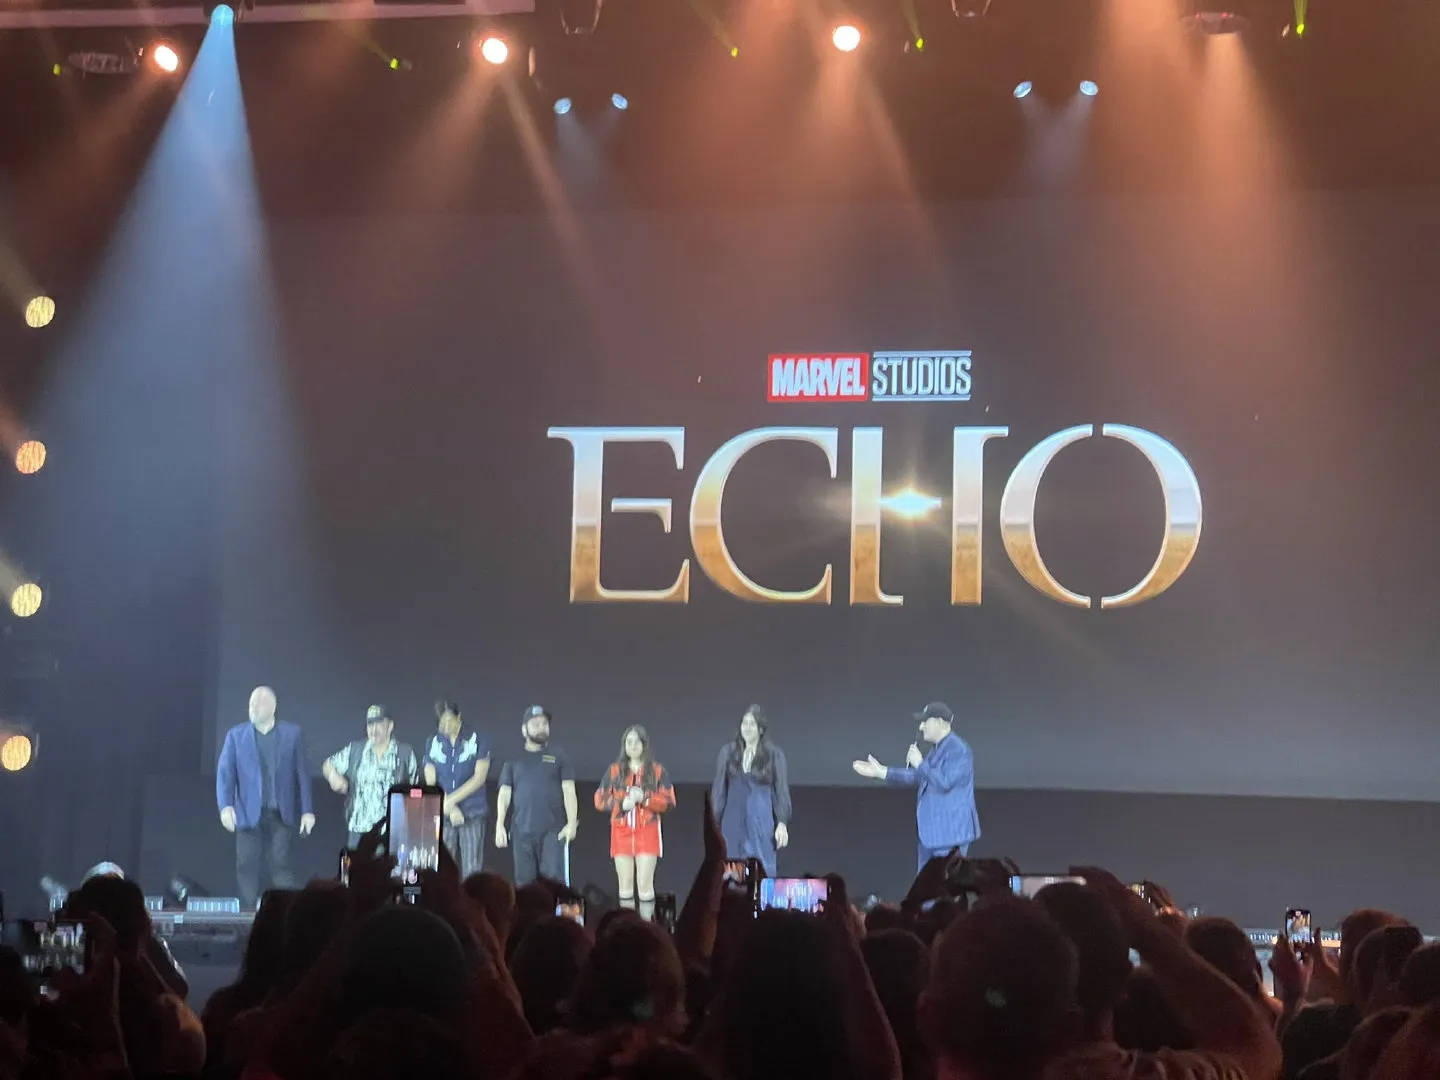 Marvel's new drama 'Echo' released first trailer at D23Expo | FMV6